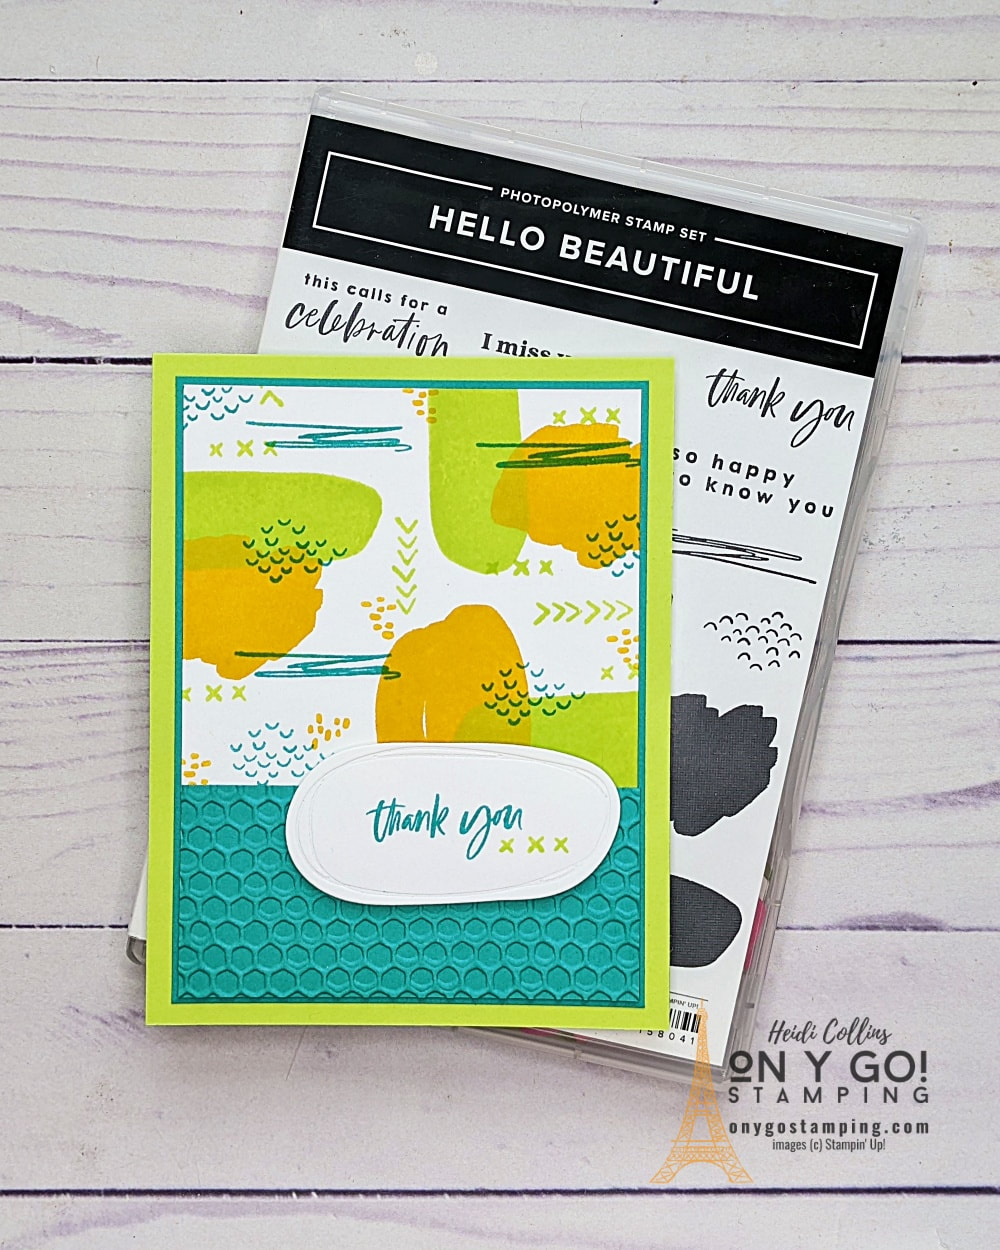 Handmade thank you card idea using the Hello Beautiful stamp set from Stampin' Up!® in bold colors.